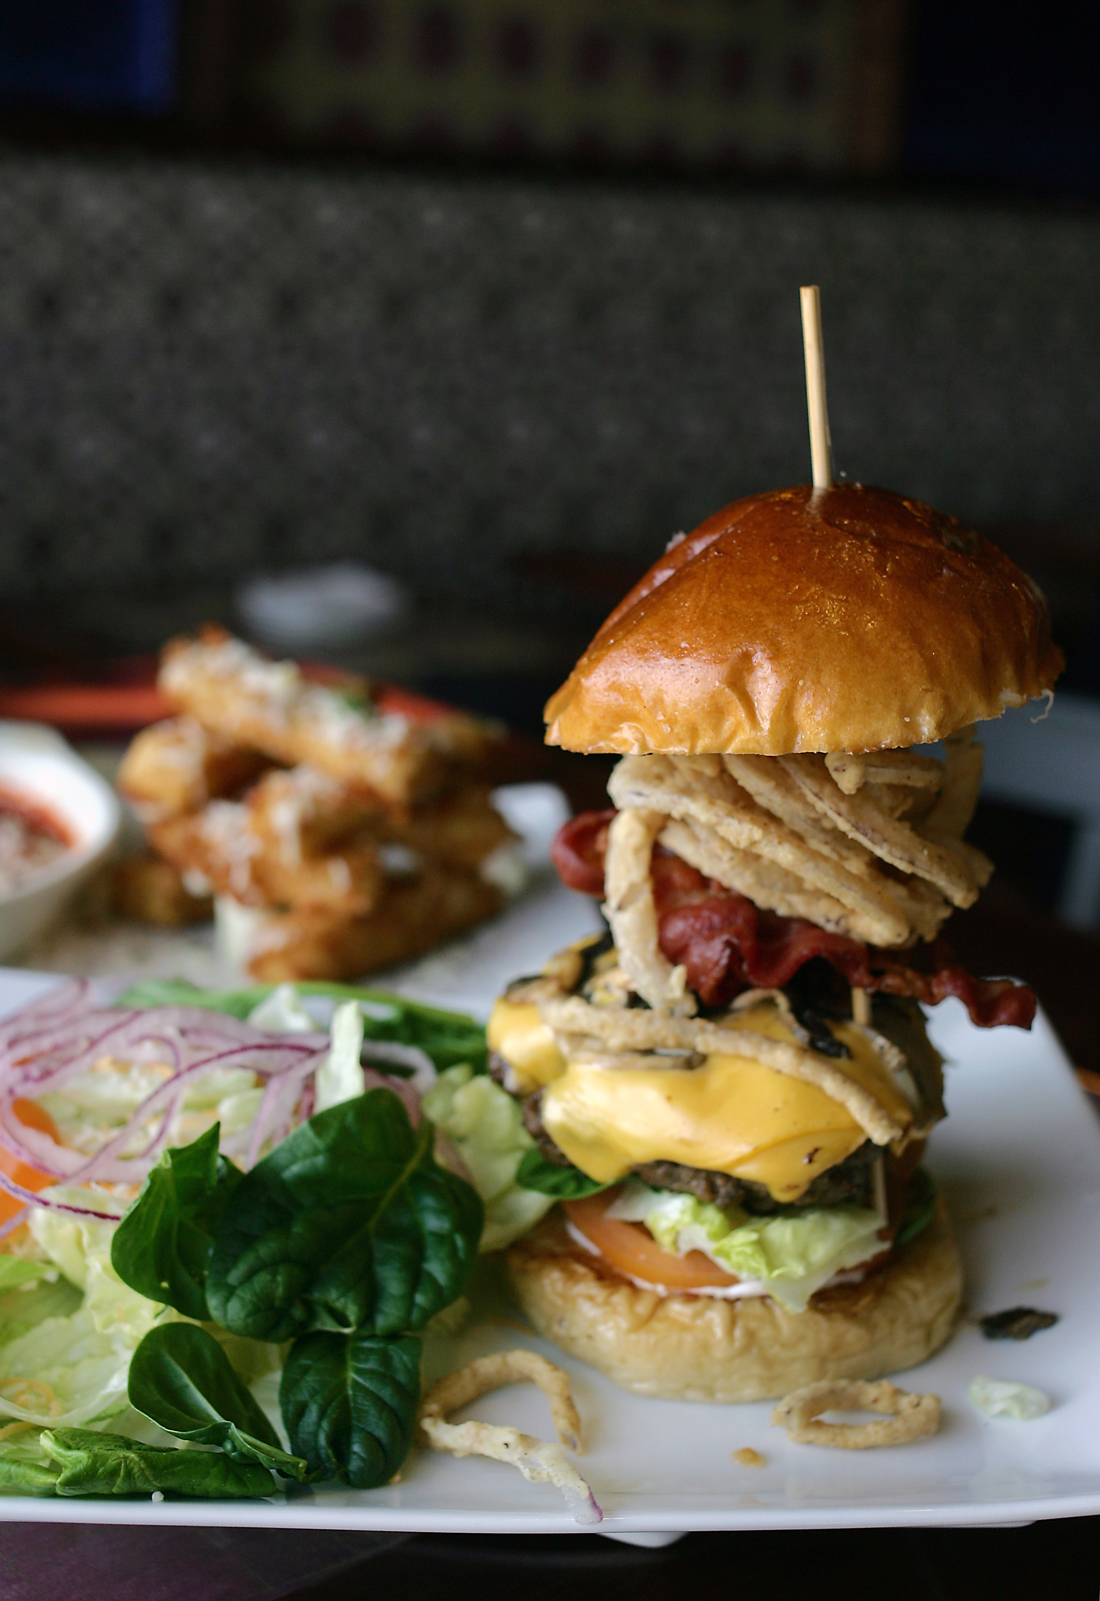 “A high-quality mess”: Orchid City’s Downtown Burger. Lee Chastain